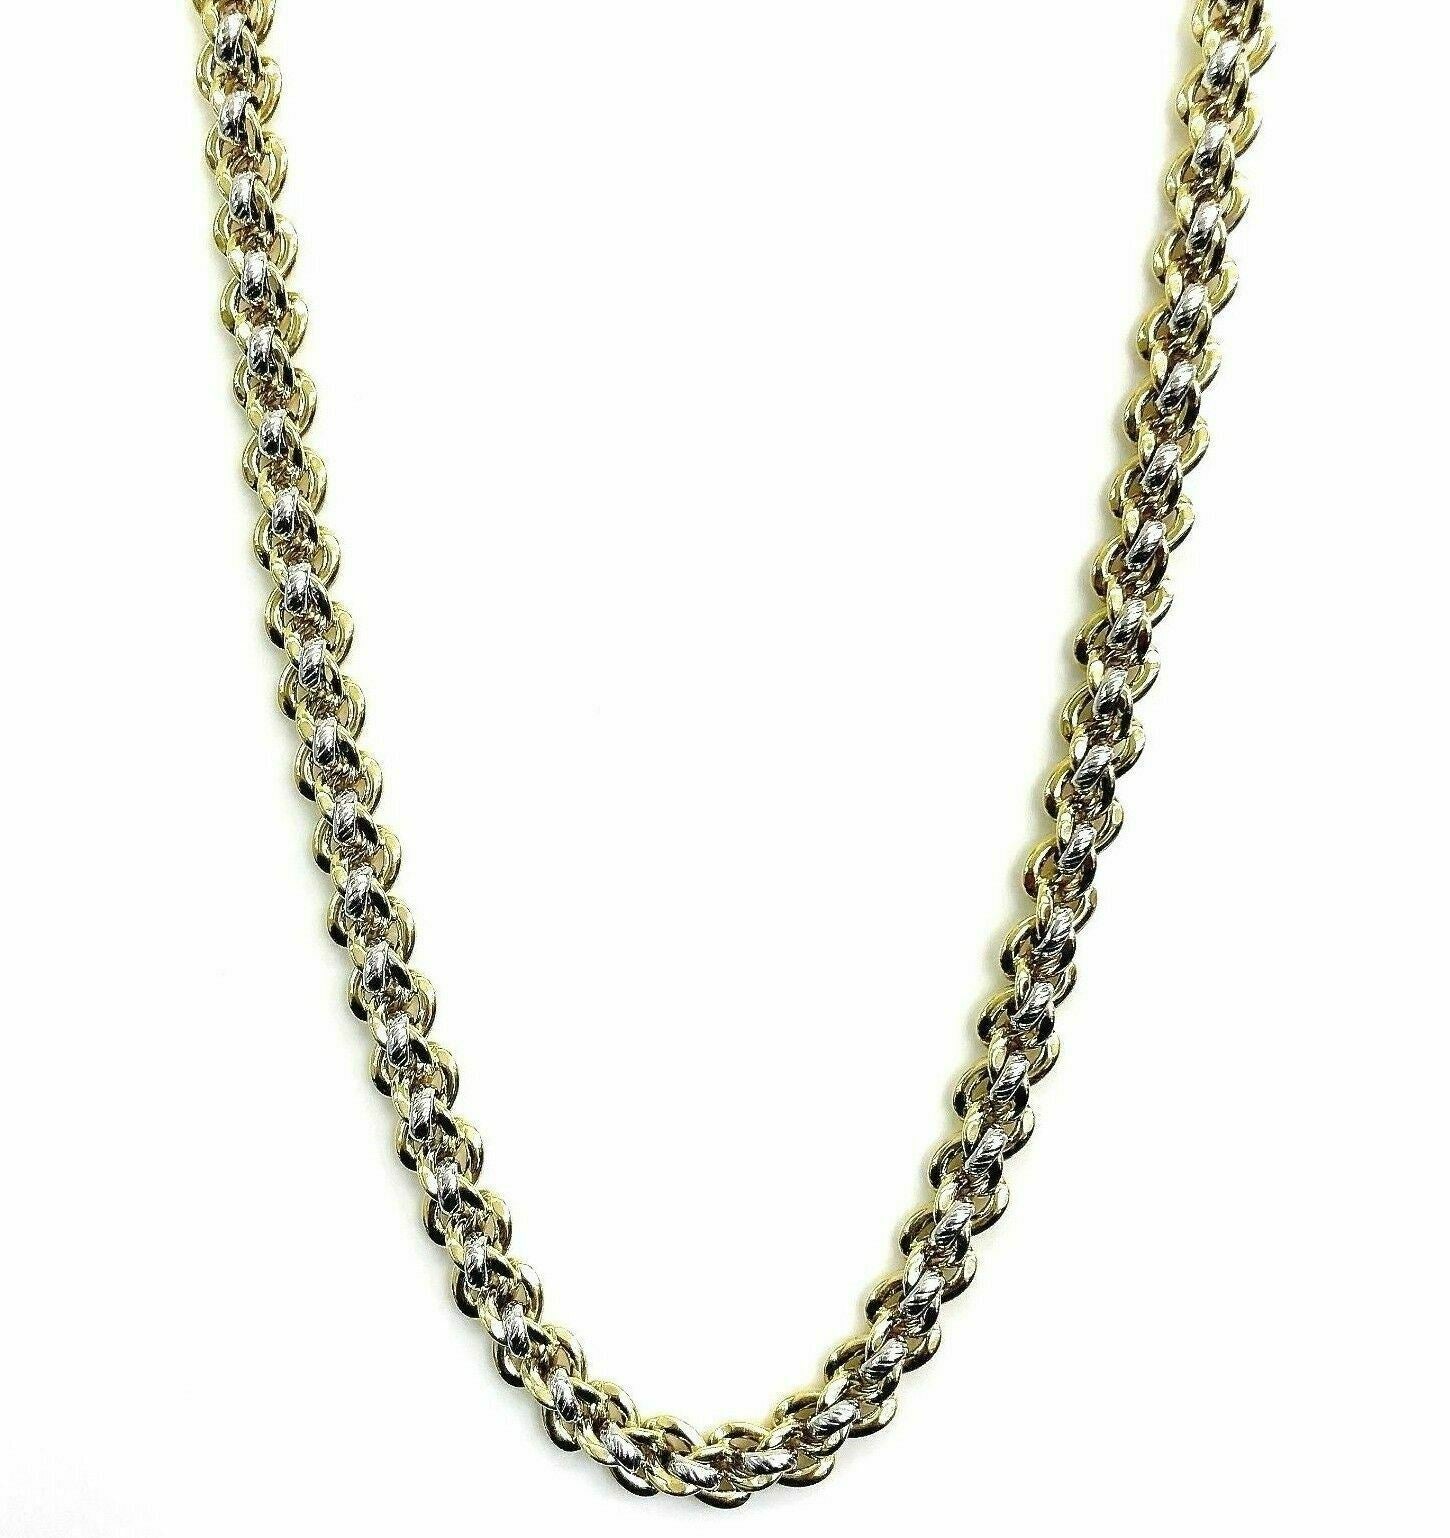 Solid 14K Gold 2Tone Gold Chain/Necklace 29.5 Inch 2.96 Ounces Made in Italy